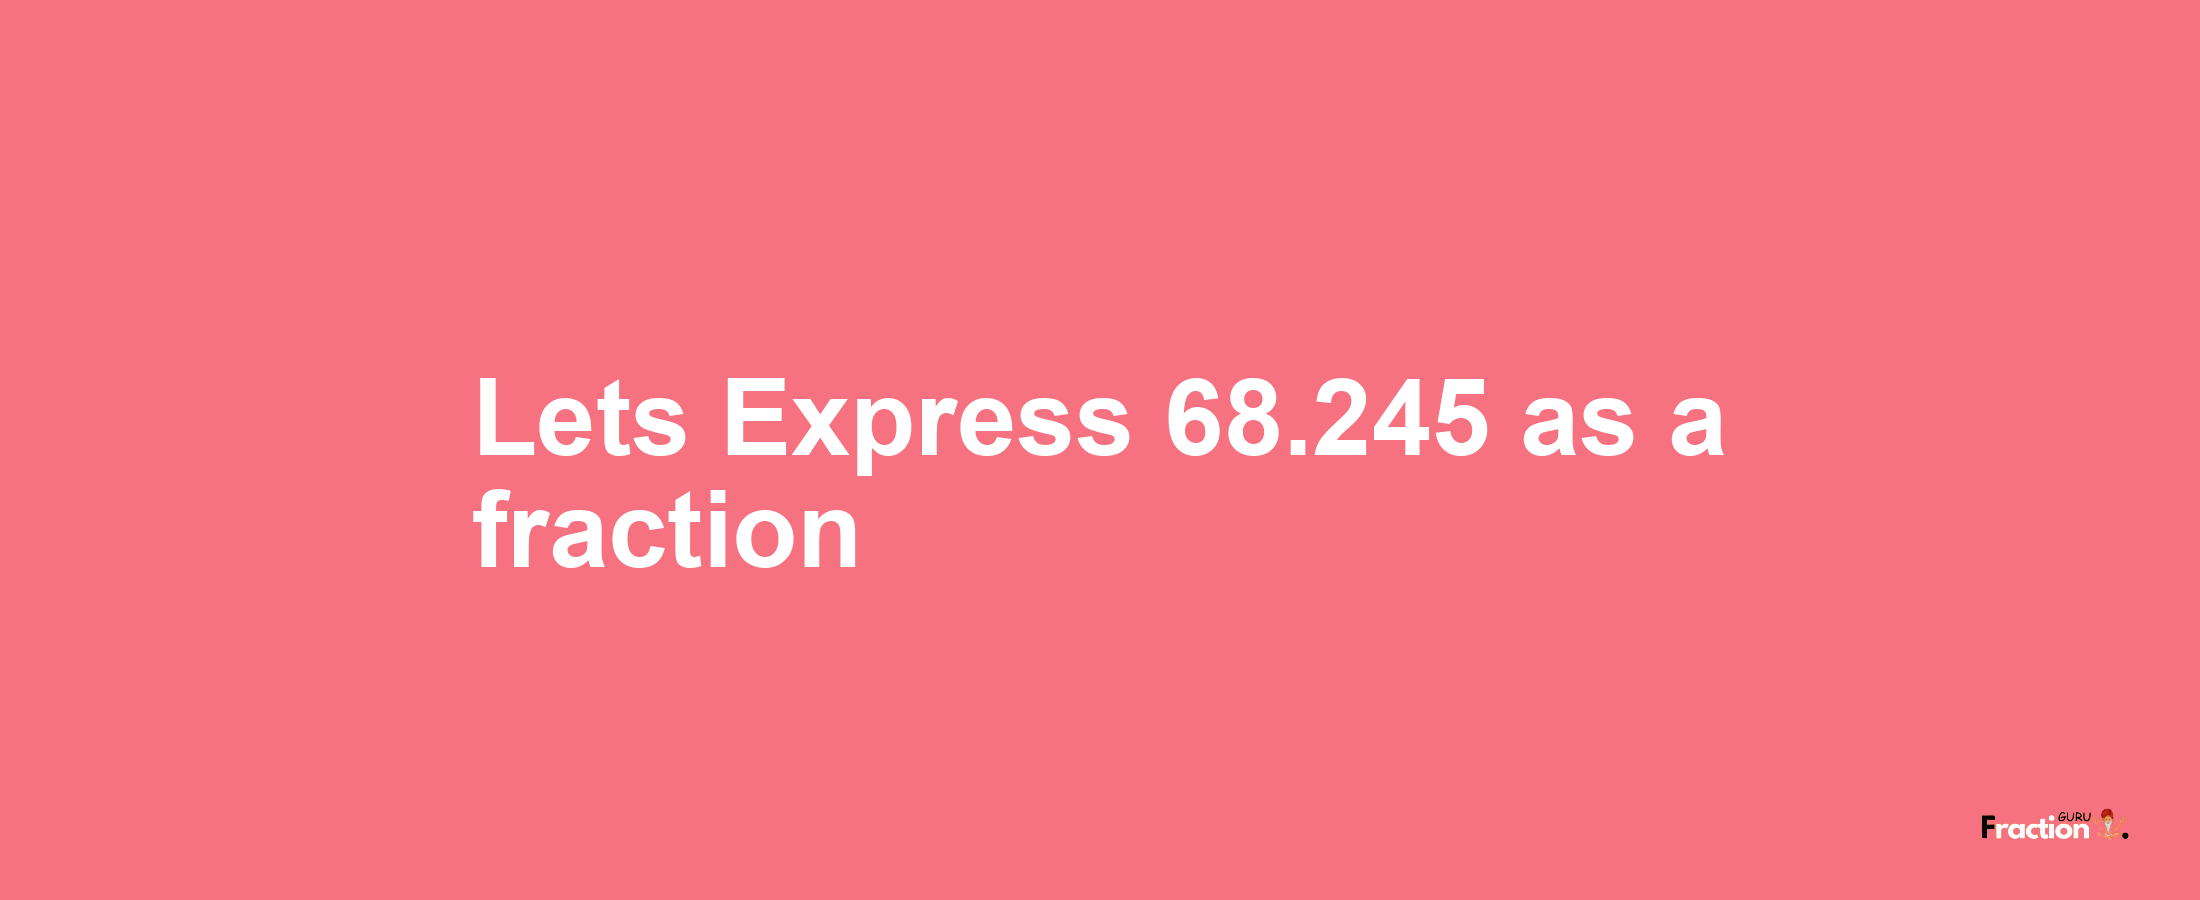 Lets Express 68.245 as afraction